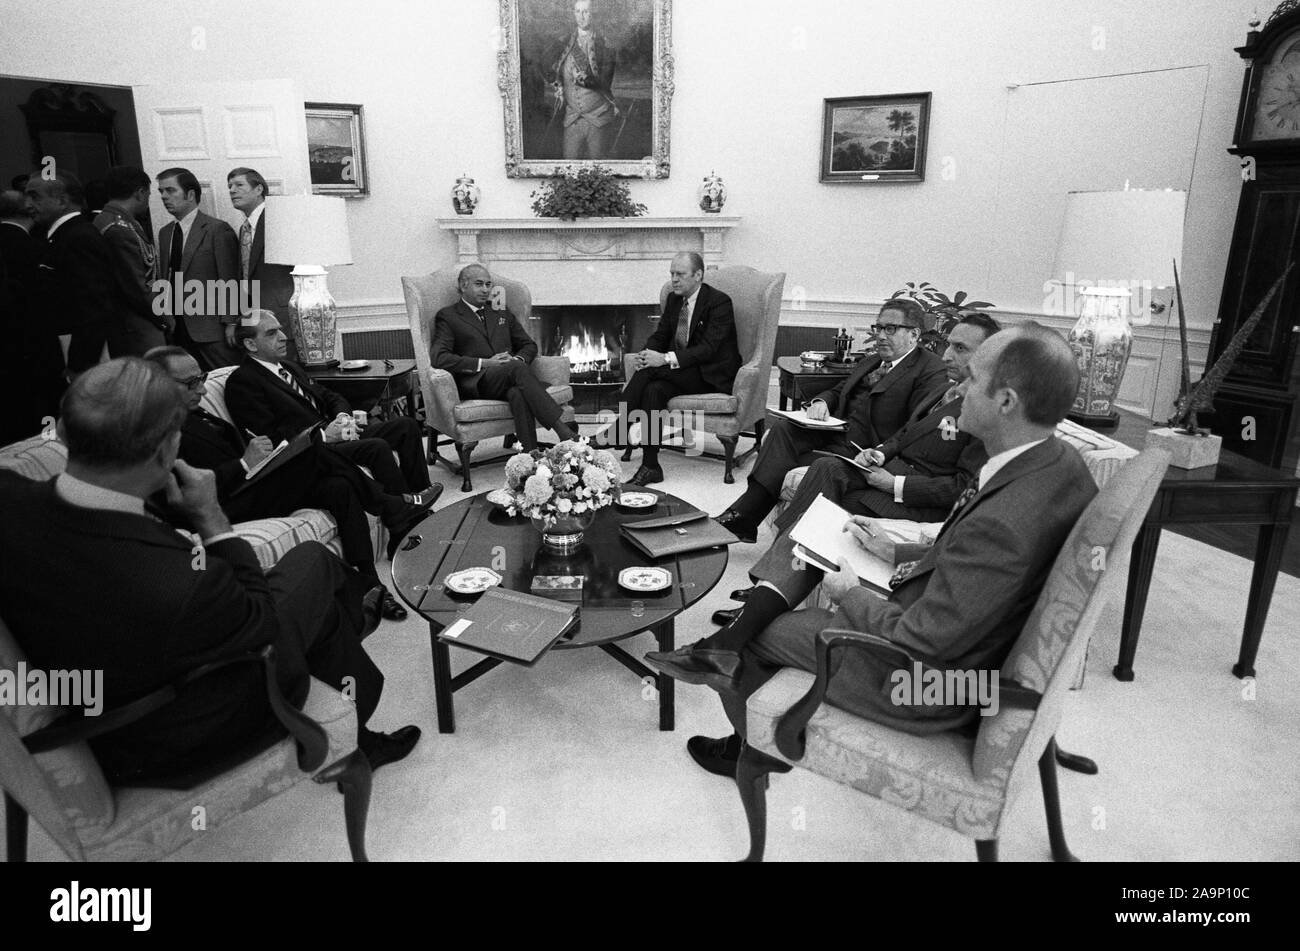 February 5, 1975 - Photograph of President Gerald R. Ford, Prime Minister Zulfikar Ali Bhutto of Pakistan, Aziz Ahmed, Agha Shahi, Sahab Zada Yaqub-Khan, Henry Kissinger, Henry Byroade, and Brent Scowcroft at a Meeting in the Oval Office Stock Photo